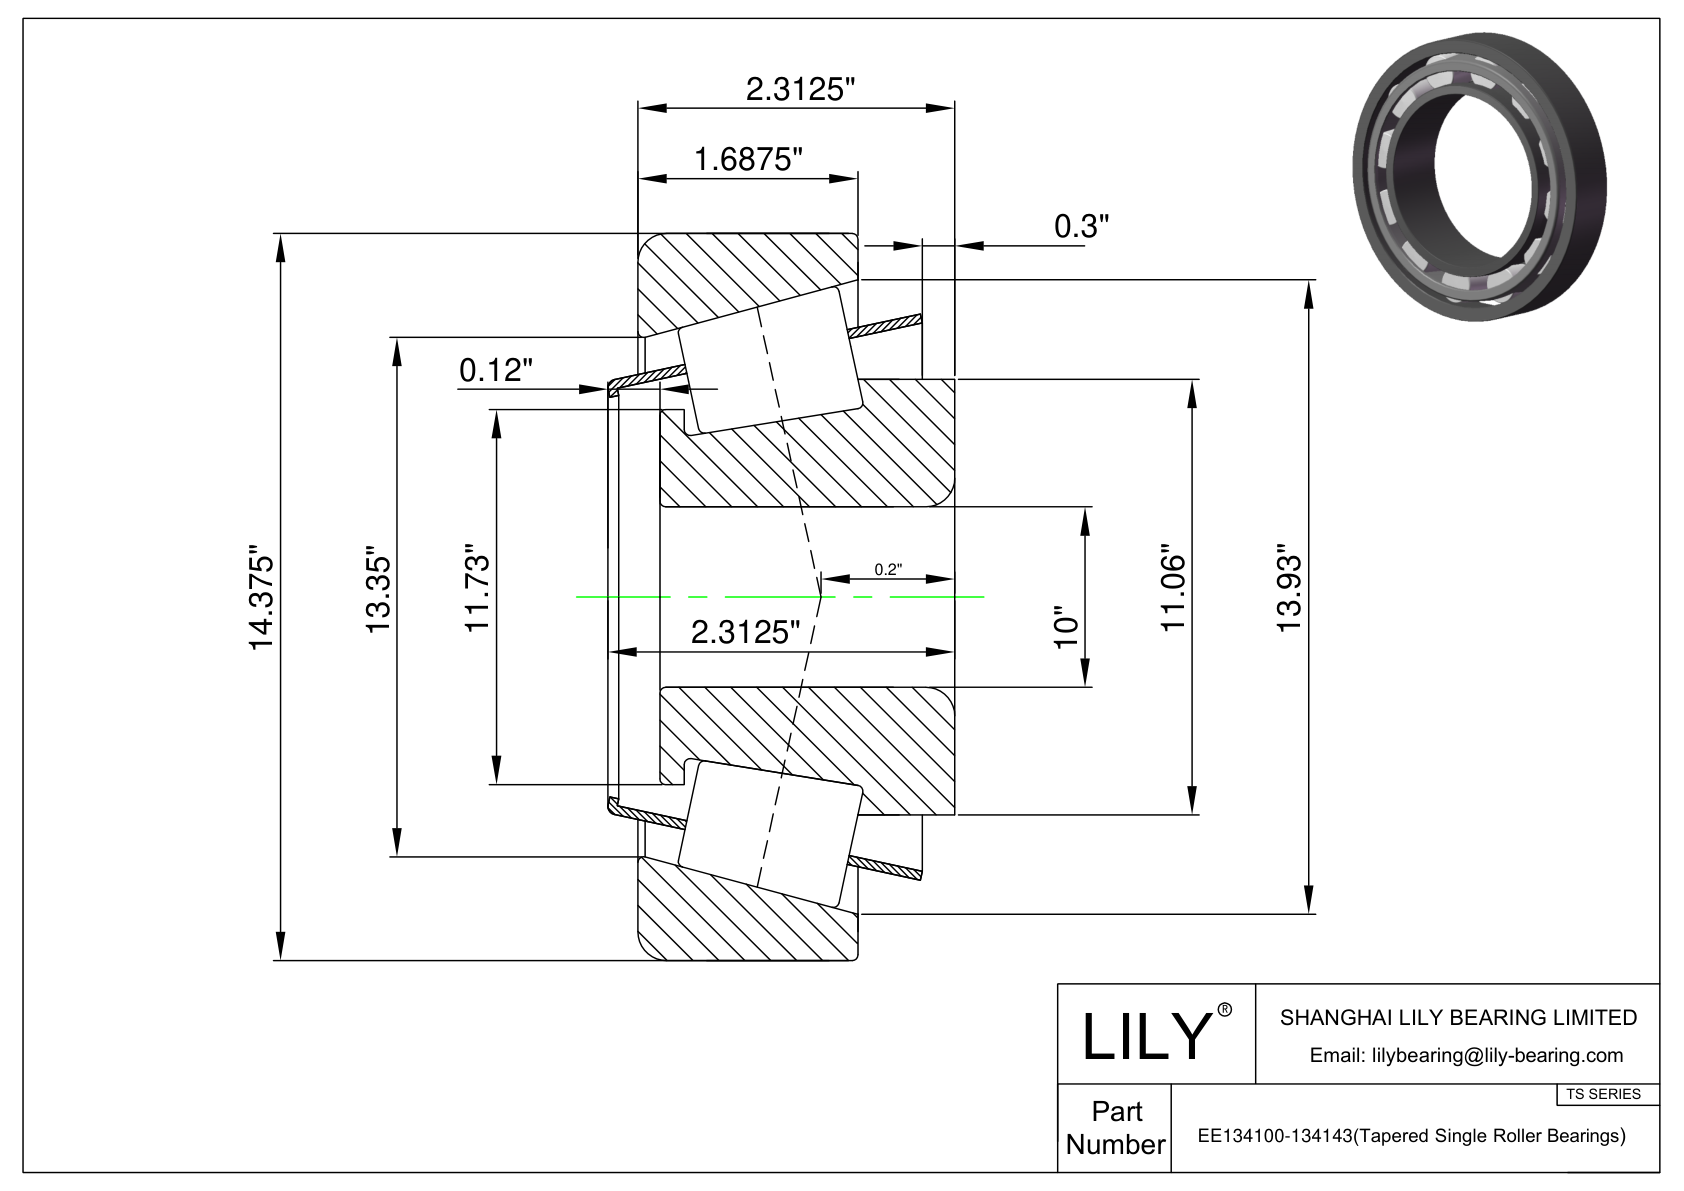 EE134100-134143 TS (Tapered Single Roller Bearings) (Imperial) cad drawing